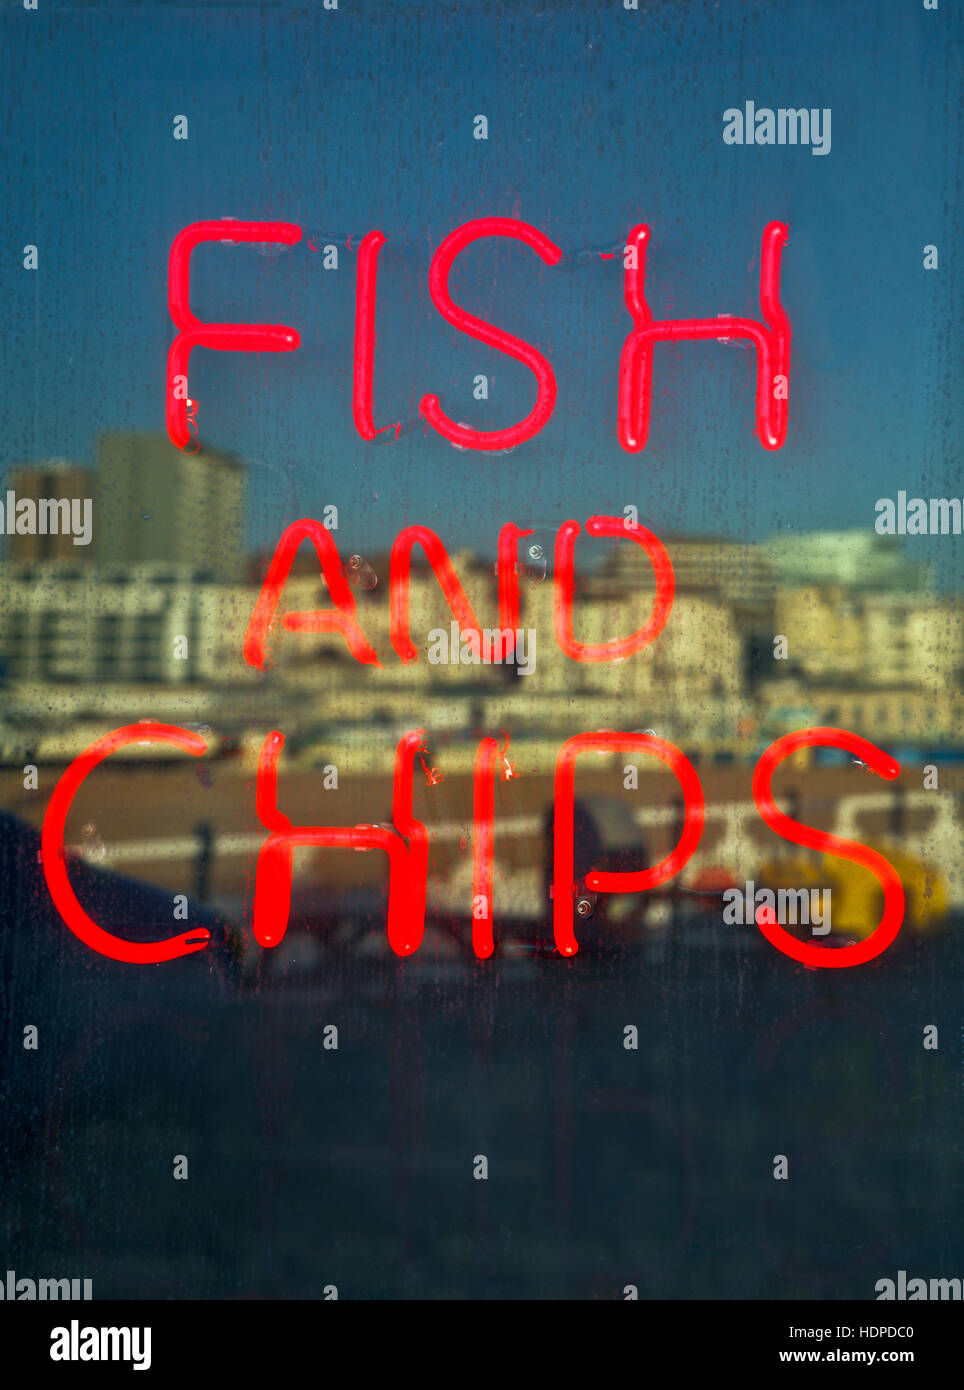 Neon fish and chips sign. Stock Photo